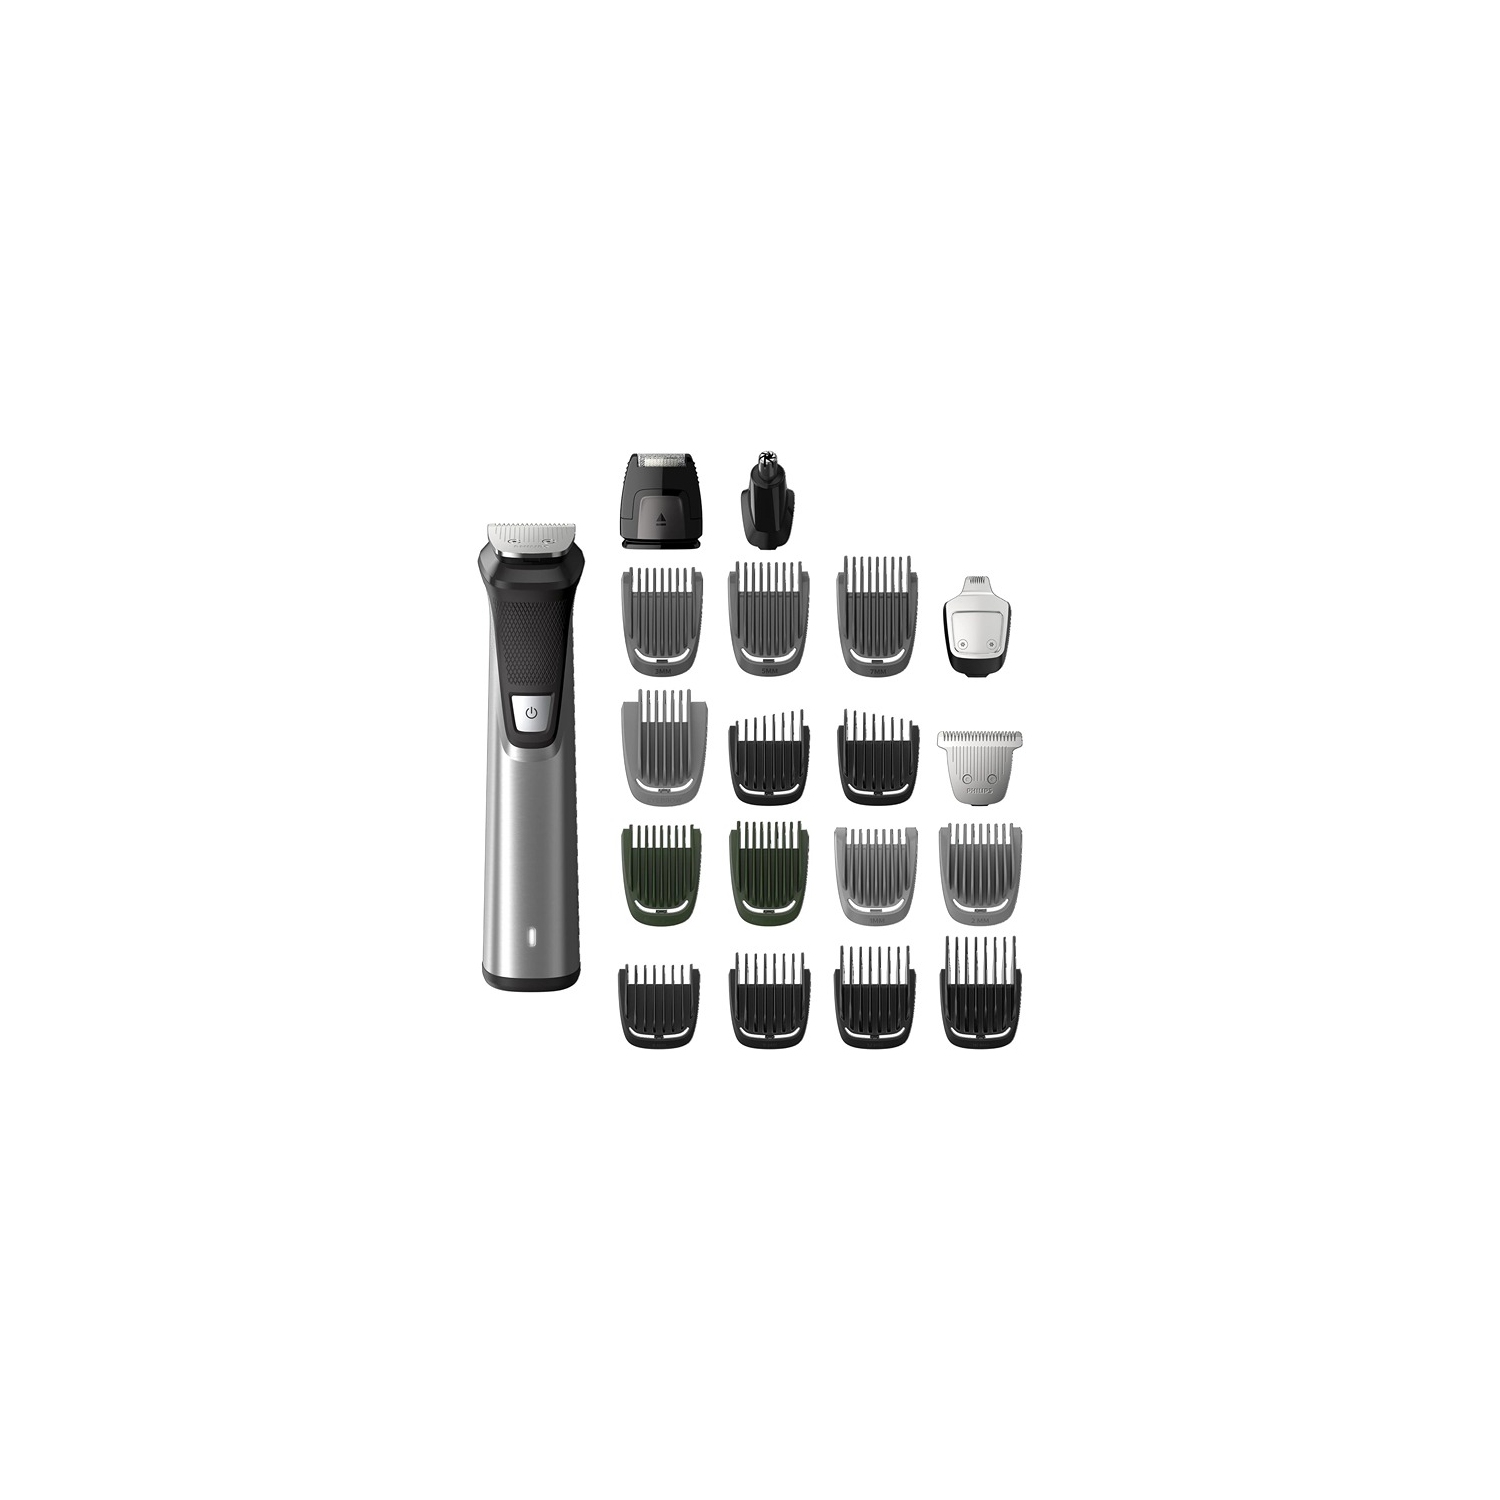 Philips Male Grooming 5.5 x 15 x 24.5 cm Cordless Wet & Dry Multigroom Series 7000 with 19 Trimming Attachments Black